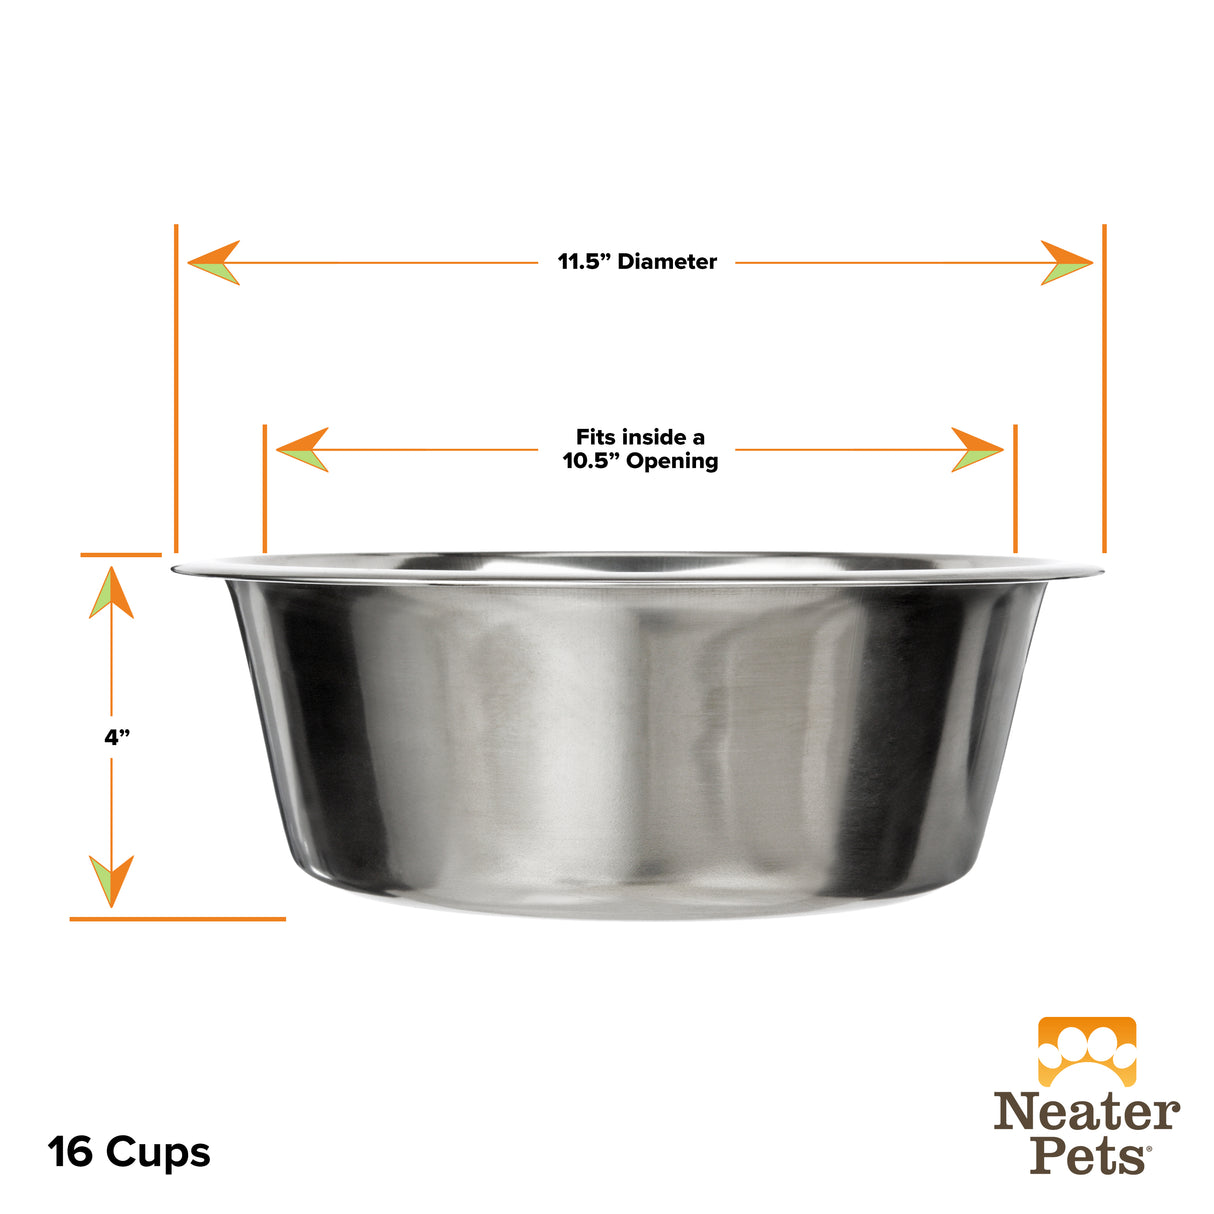 Neater Pet Brands Big Bowl - Extra Large Bowl for Cats or Small Dogs - Large Surface Area (8 Cups Capacity Gunmetal Grey)